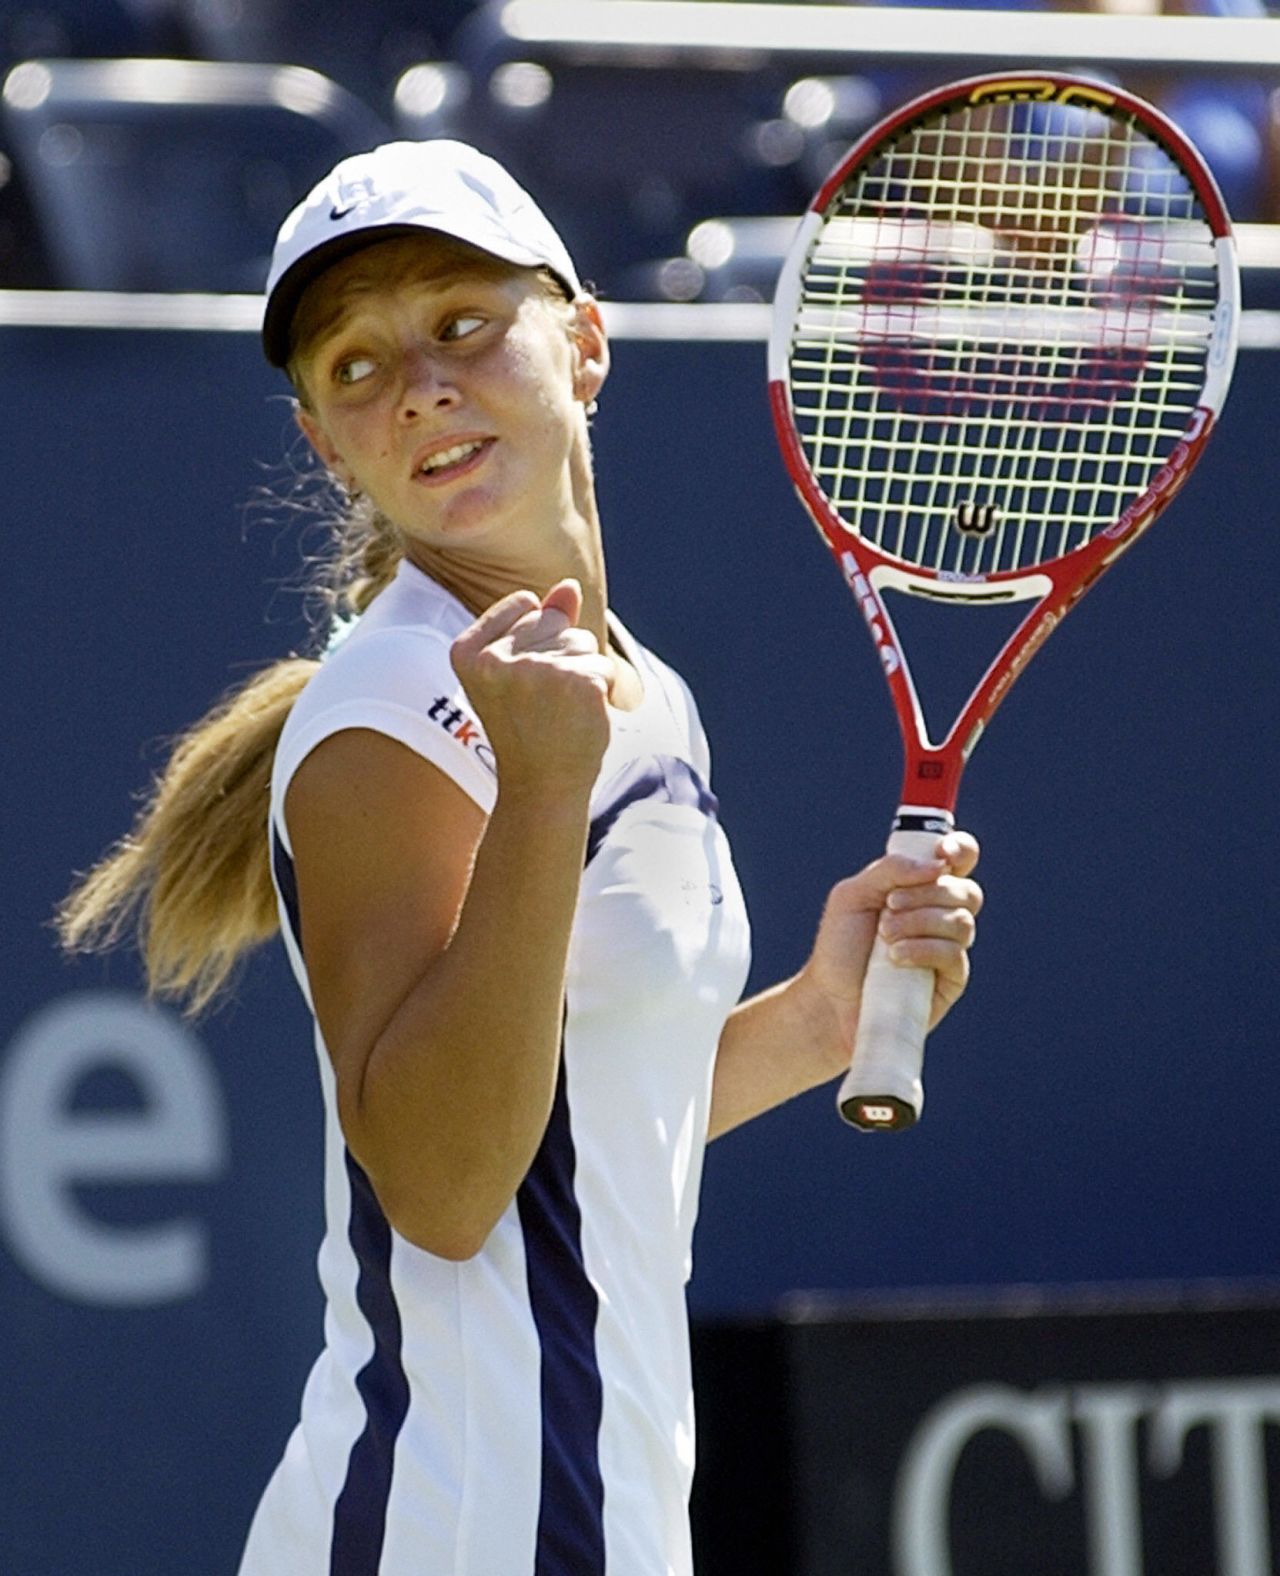 Chakvetadze launched herself onto the senior circuit as a 17-year-old in 2004 when she upset world No. 3 Anastasia Myskina, another Russian, in the second round at the U.S. Open.